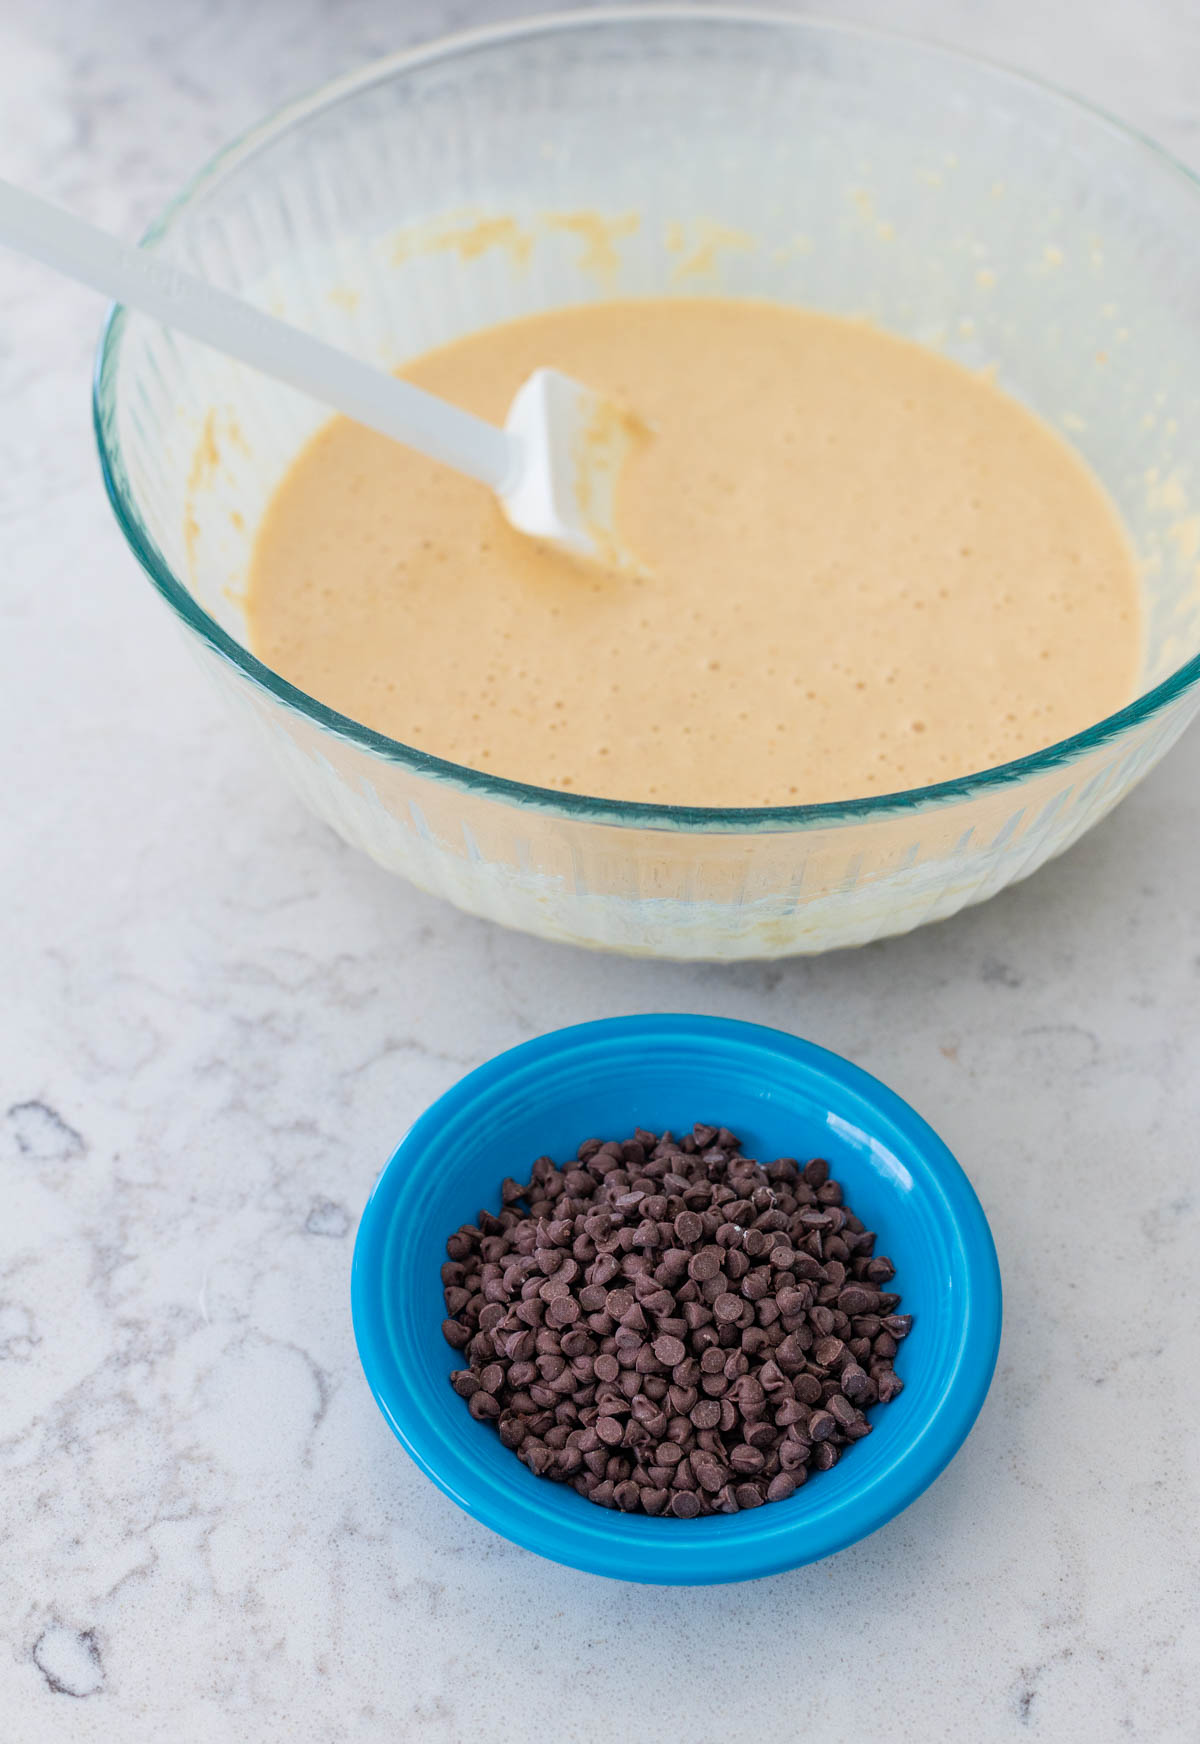 The mixed waffle batter has a bowl of mini chocolate chips ready to be added to it.